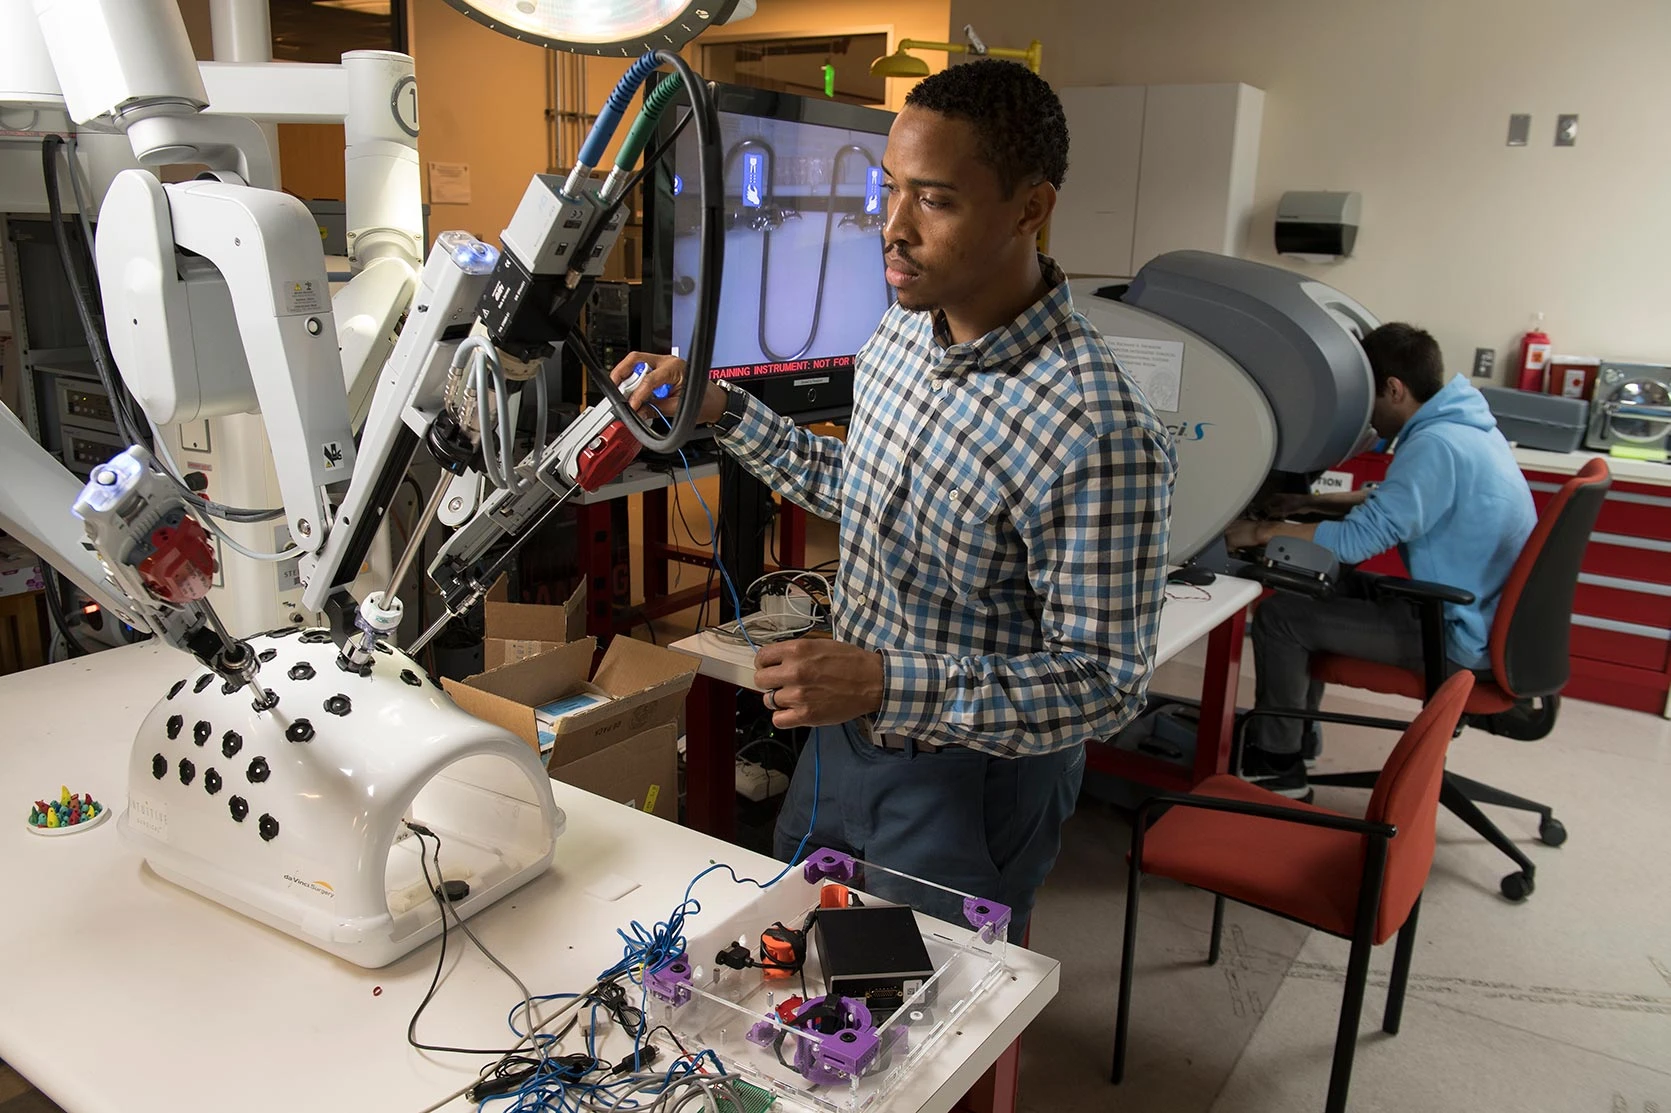 Diverse medical students work with a surgical robot designed for training in laparoscopic surgery.